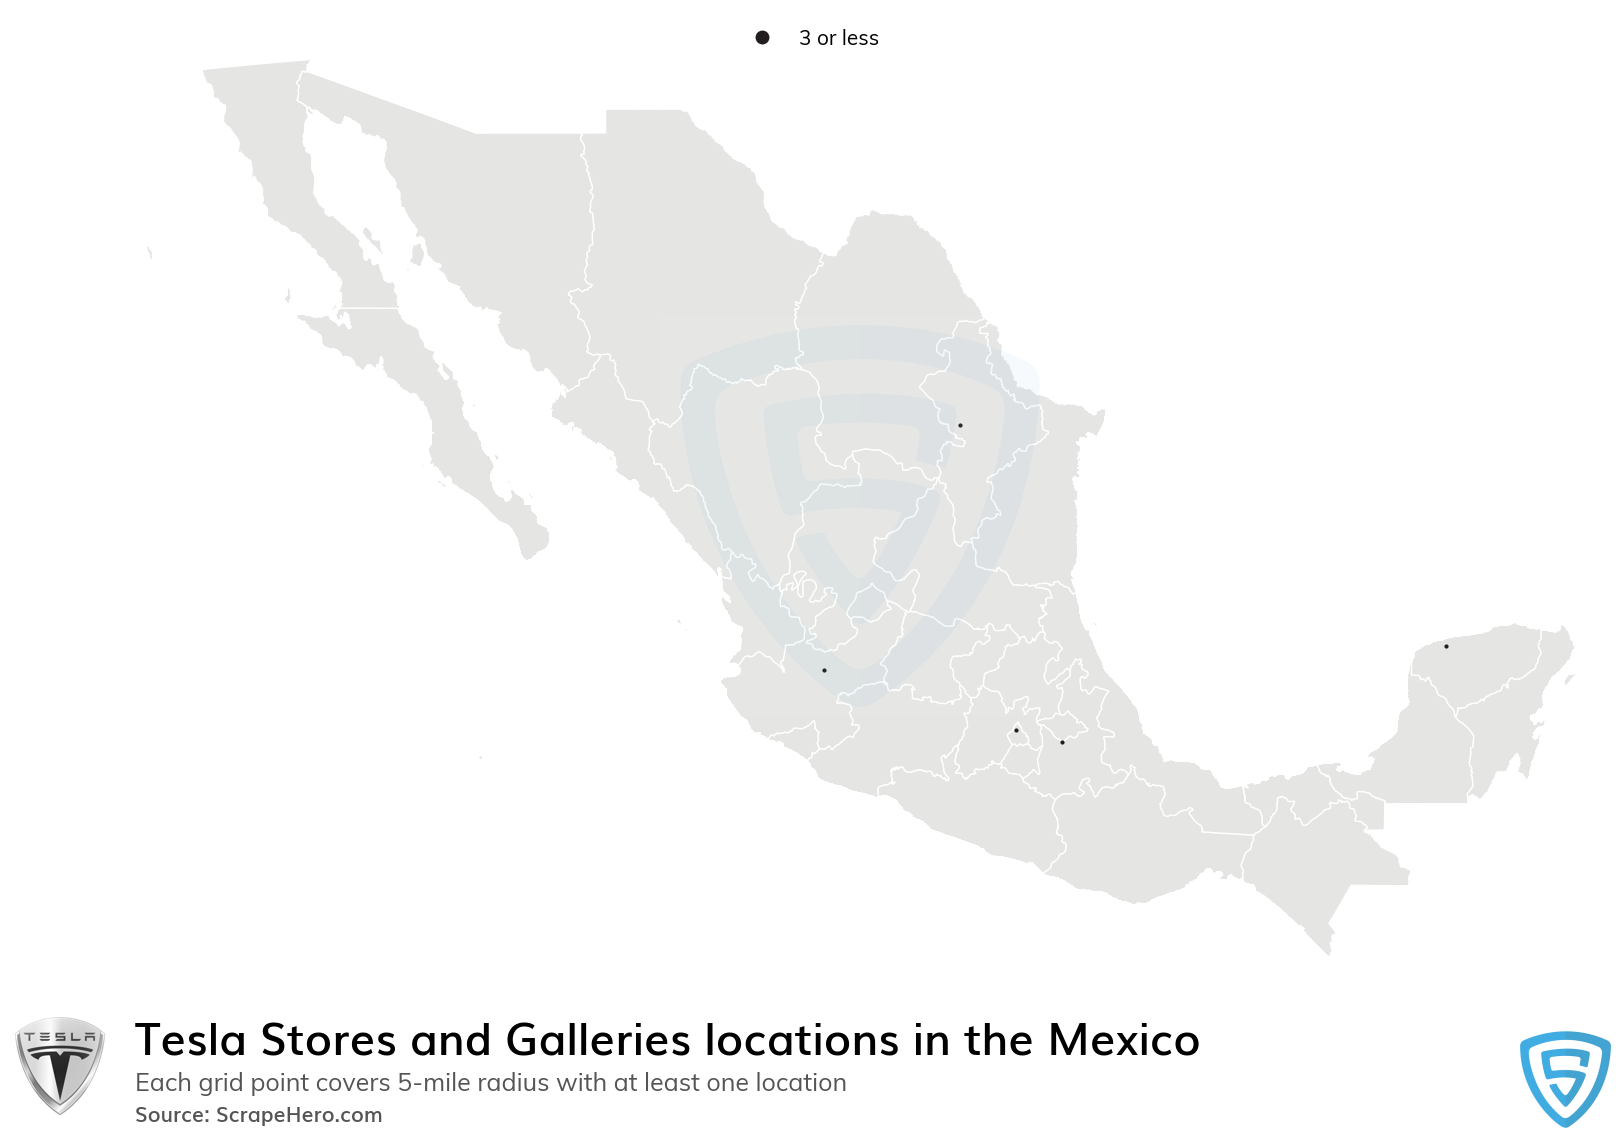 Tesla Stores and Galleries locations